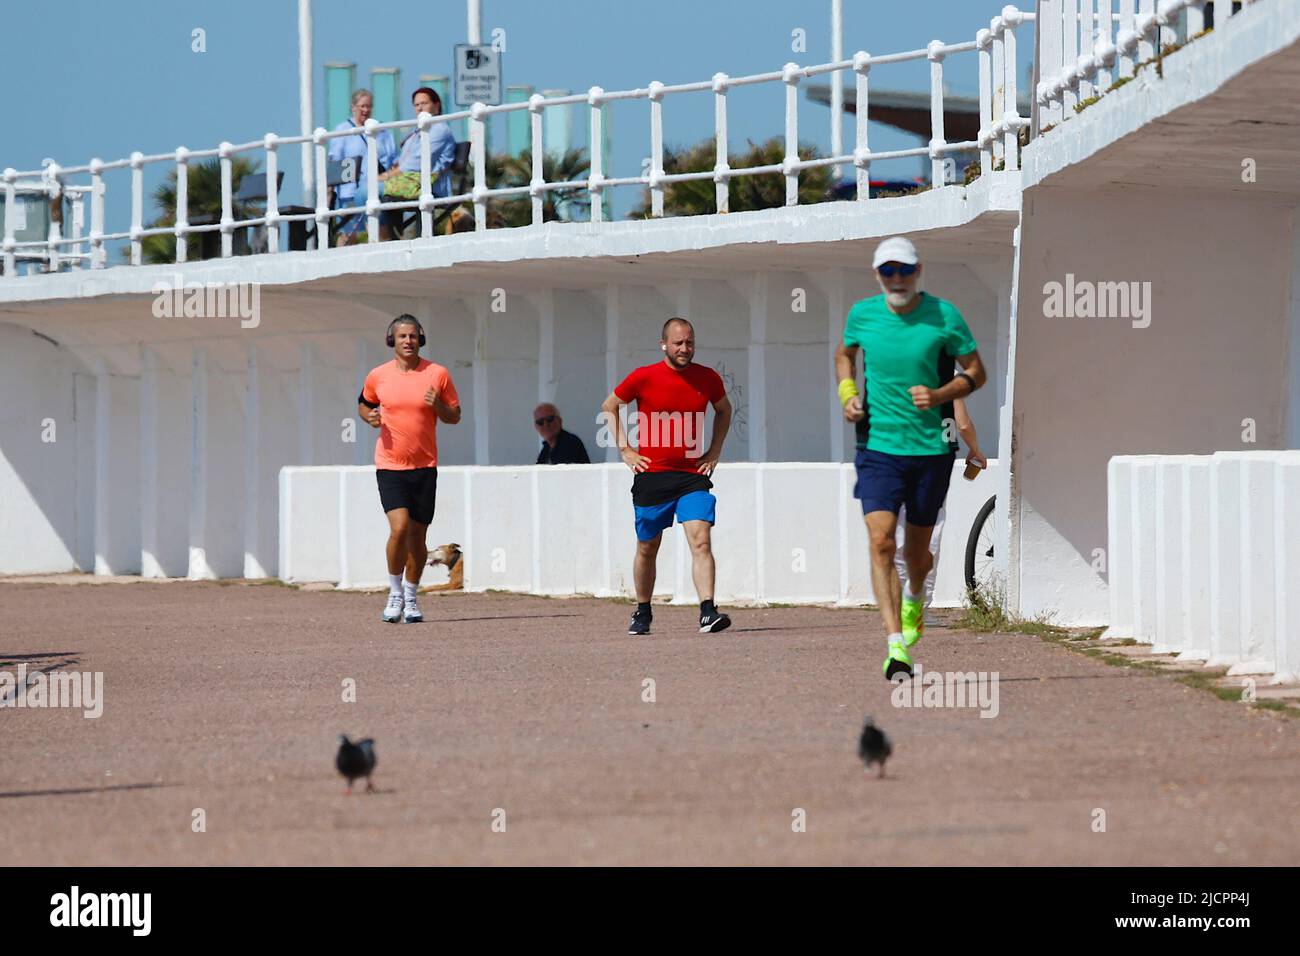 Hastings, East Sussex, UK. 15 Jun, 2022. UK Weather: Hot and sunny at the seaside town of Hastings in East Sussex as Brits enjoy the warm weather today along the seafront promenade. Joggers keep fit on the Hastings promenade. Photo Credit: Paul Lawrenson /Alamy Live News Stock Photo